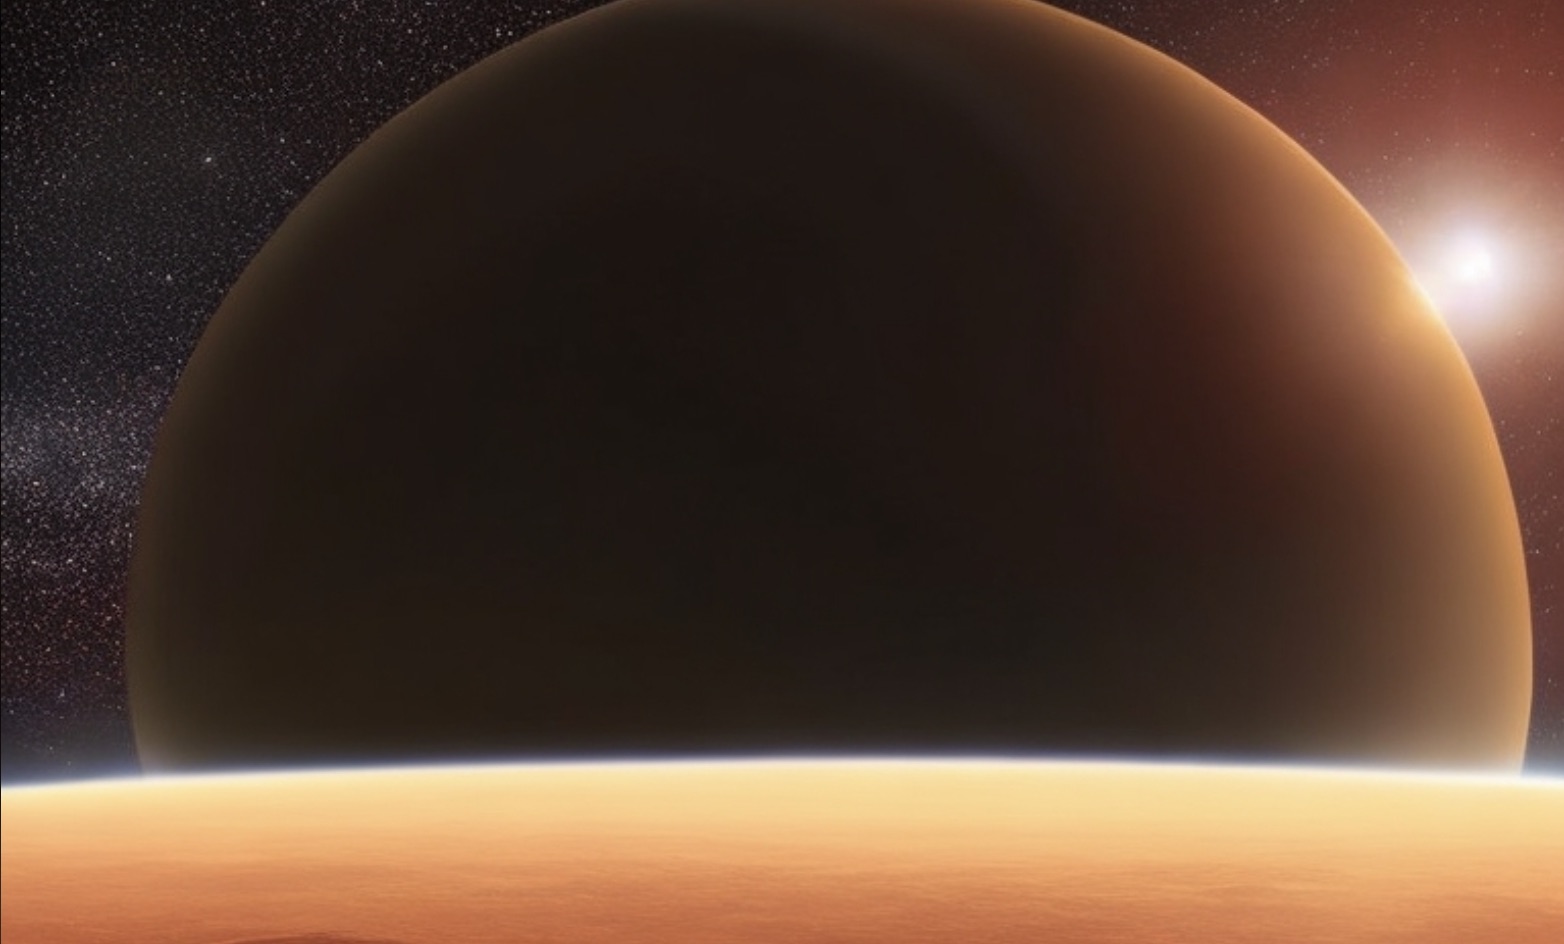 An illustration of a super earth